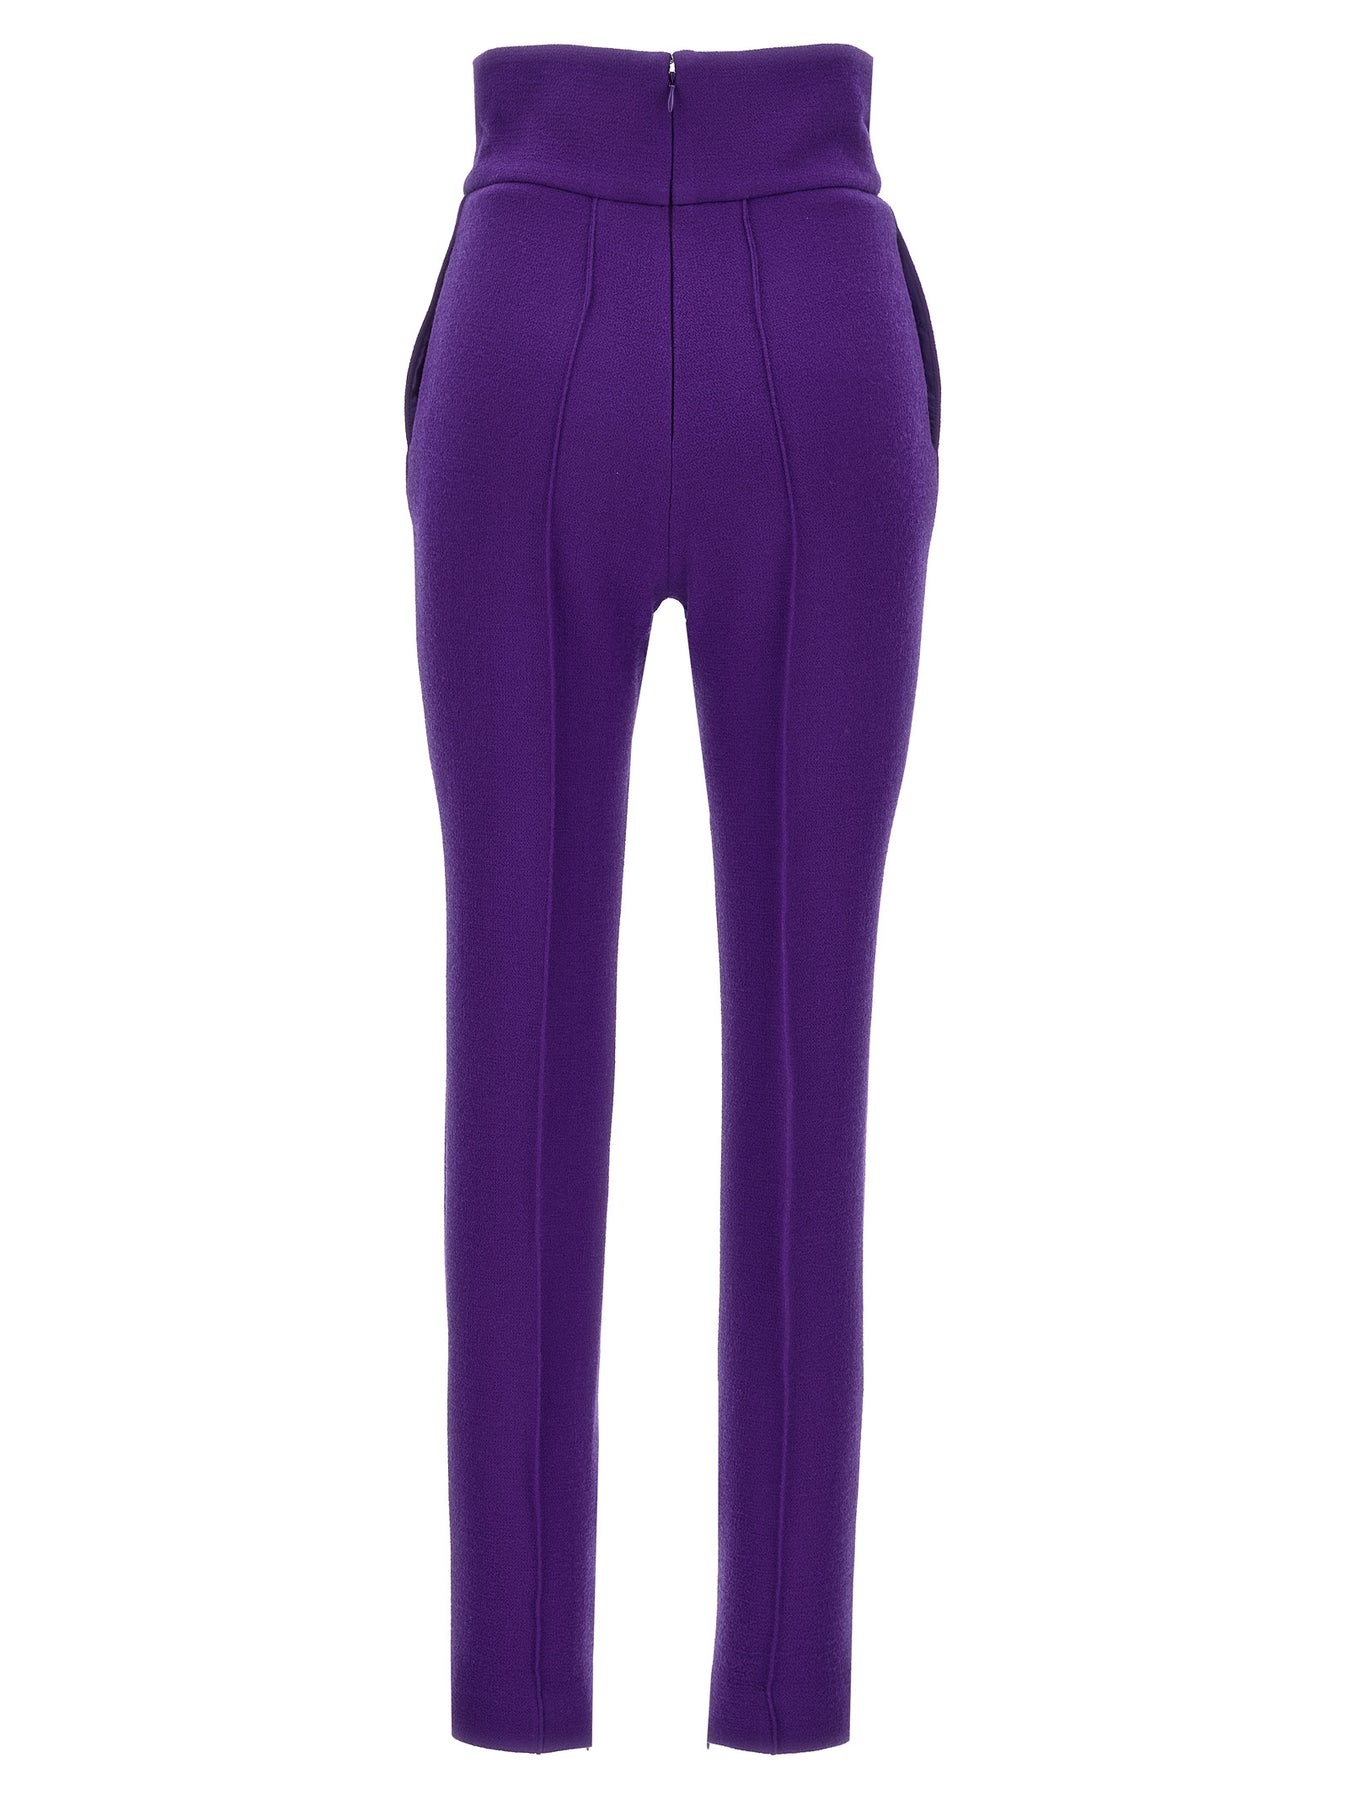 Tailored Trousers Pants Purple - 2